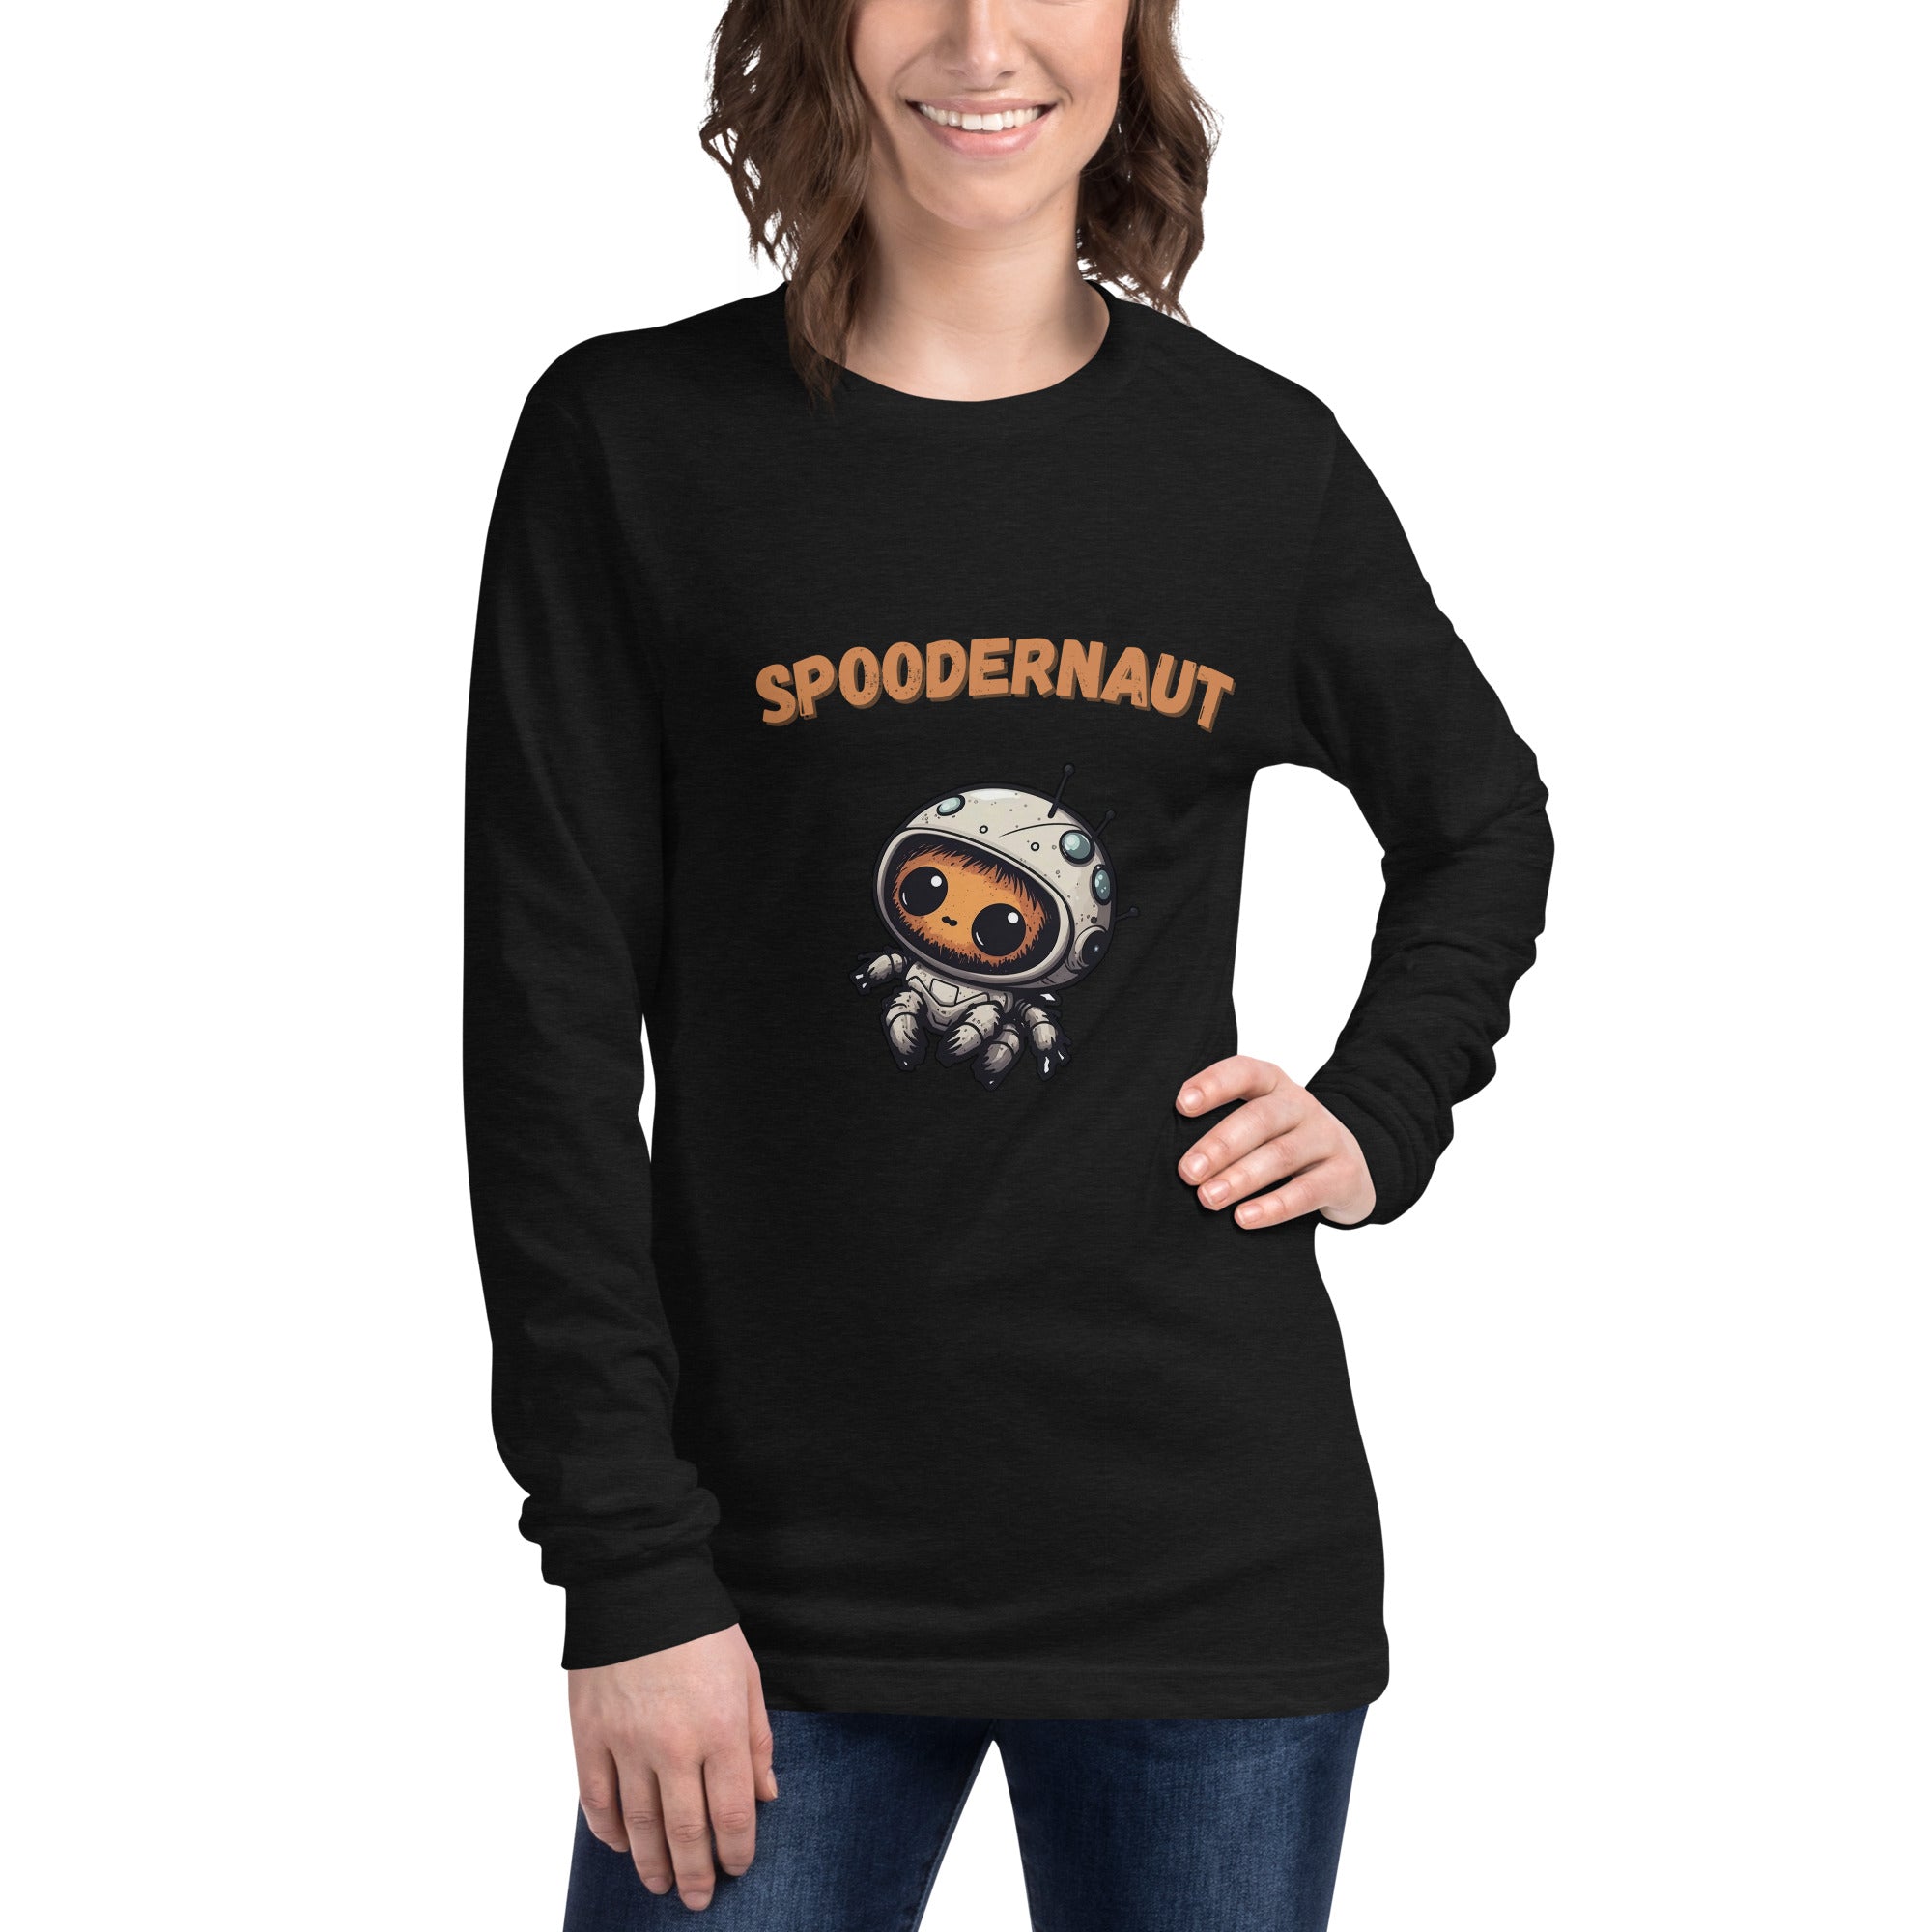 Spoodernaut Jumping Spider Unisex Long Sleeve Tee - Jumping Spiders For Sale - Spiders Source - #1 Regal Jumping Spider Store